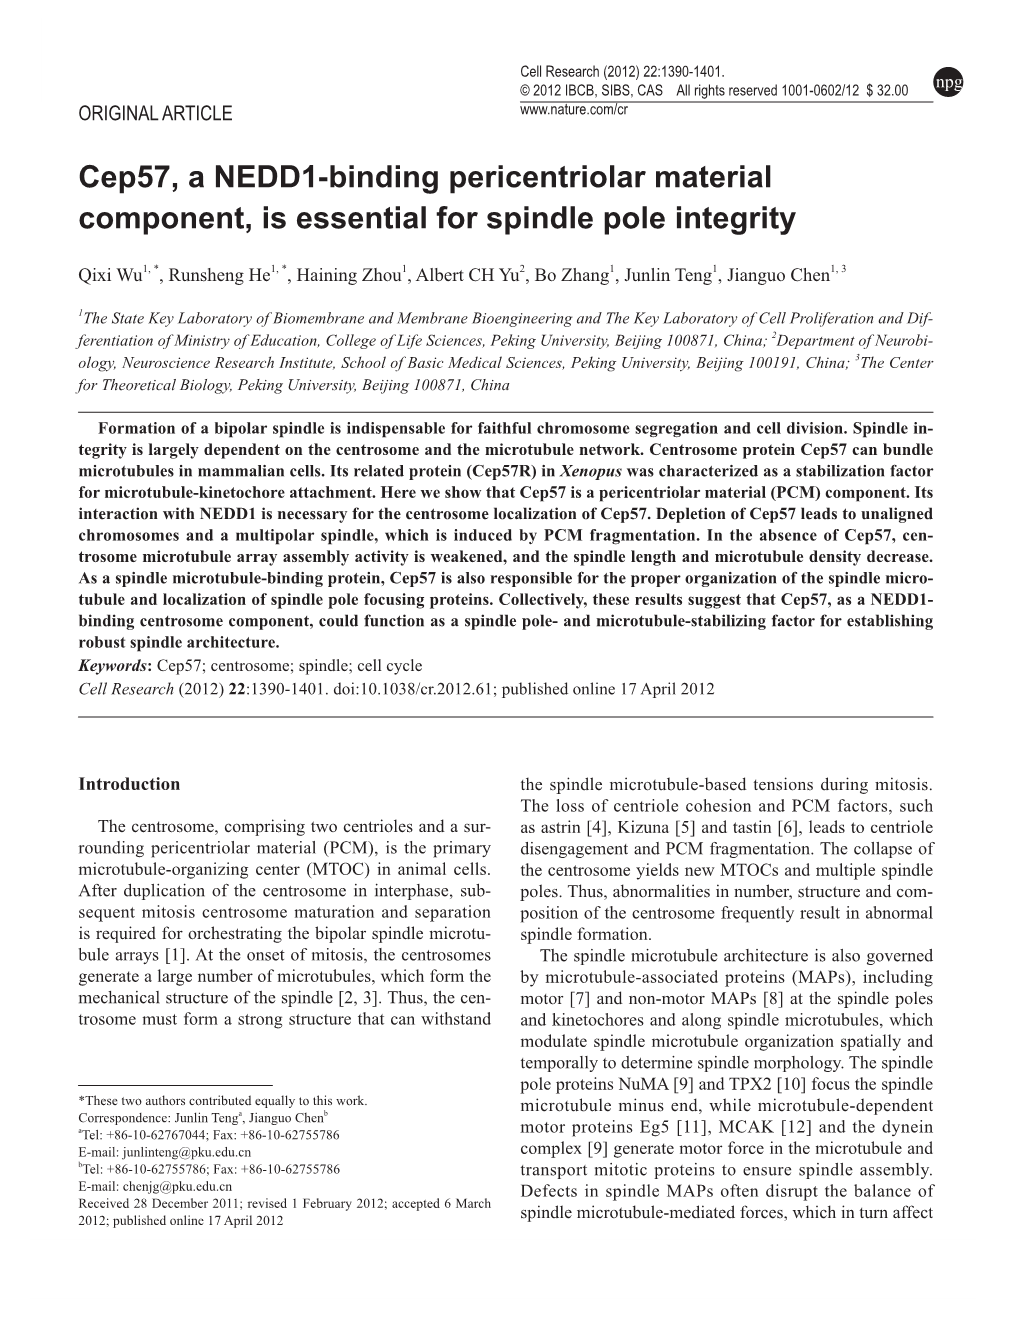 Cep57, a NEDD1-Binding Pericentriolar Material Component, Is Essential for Spindle Pole Integrity